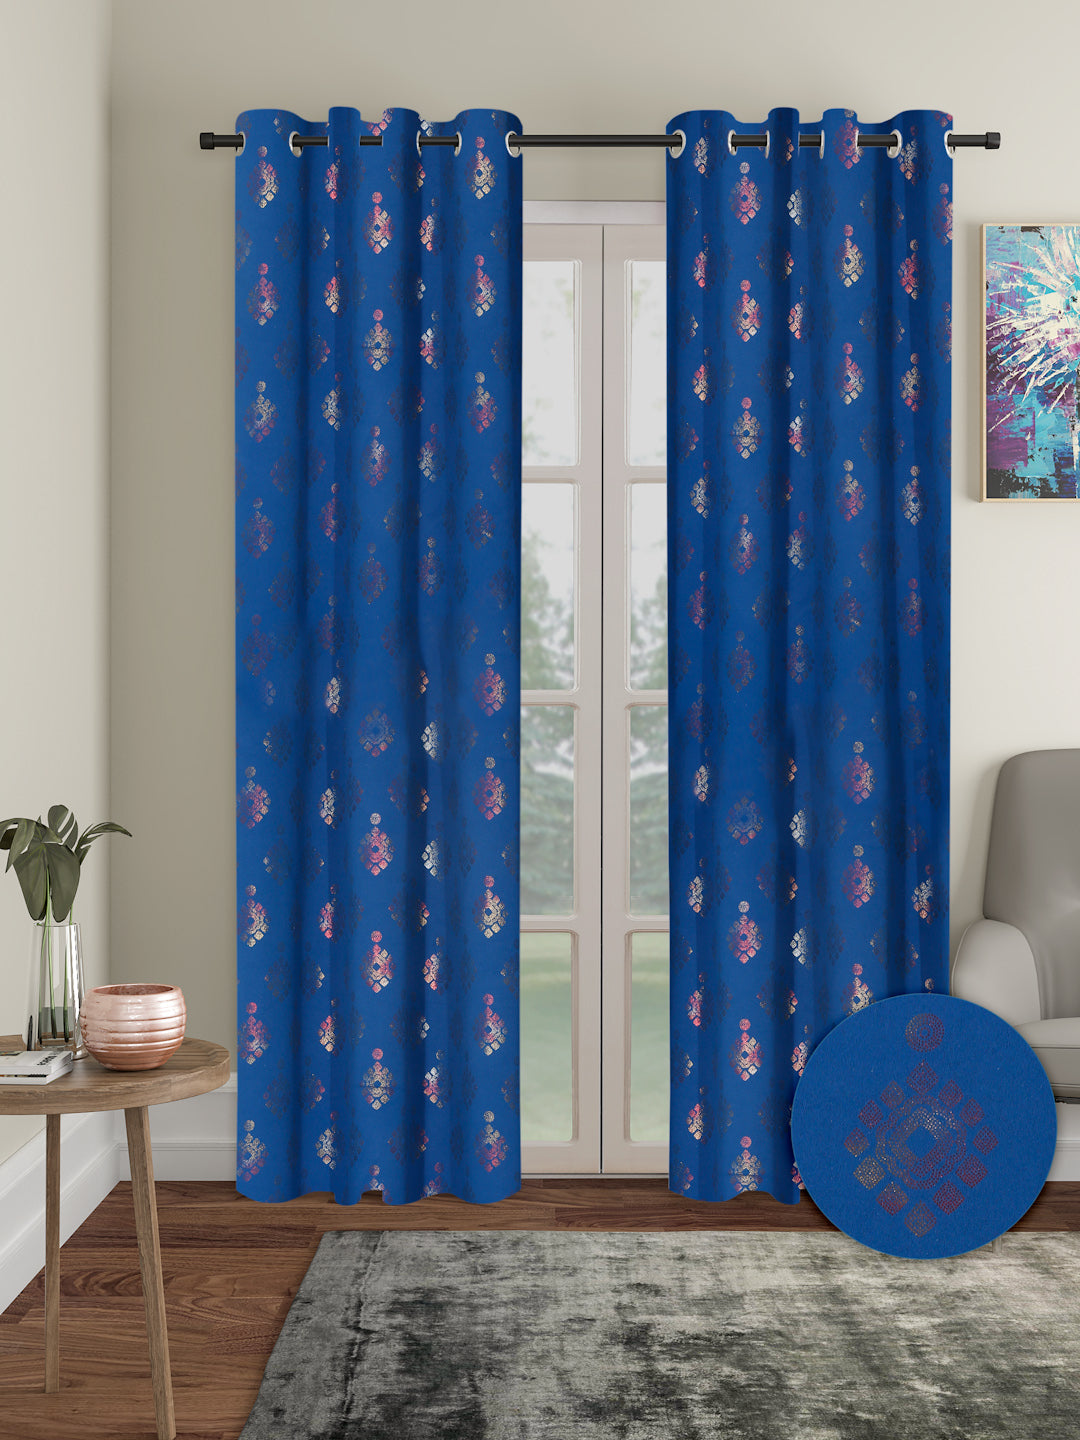 Pack of 2 Polyester Blackout Foil Door Curtains- Navy Blue